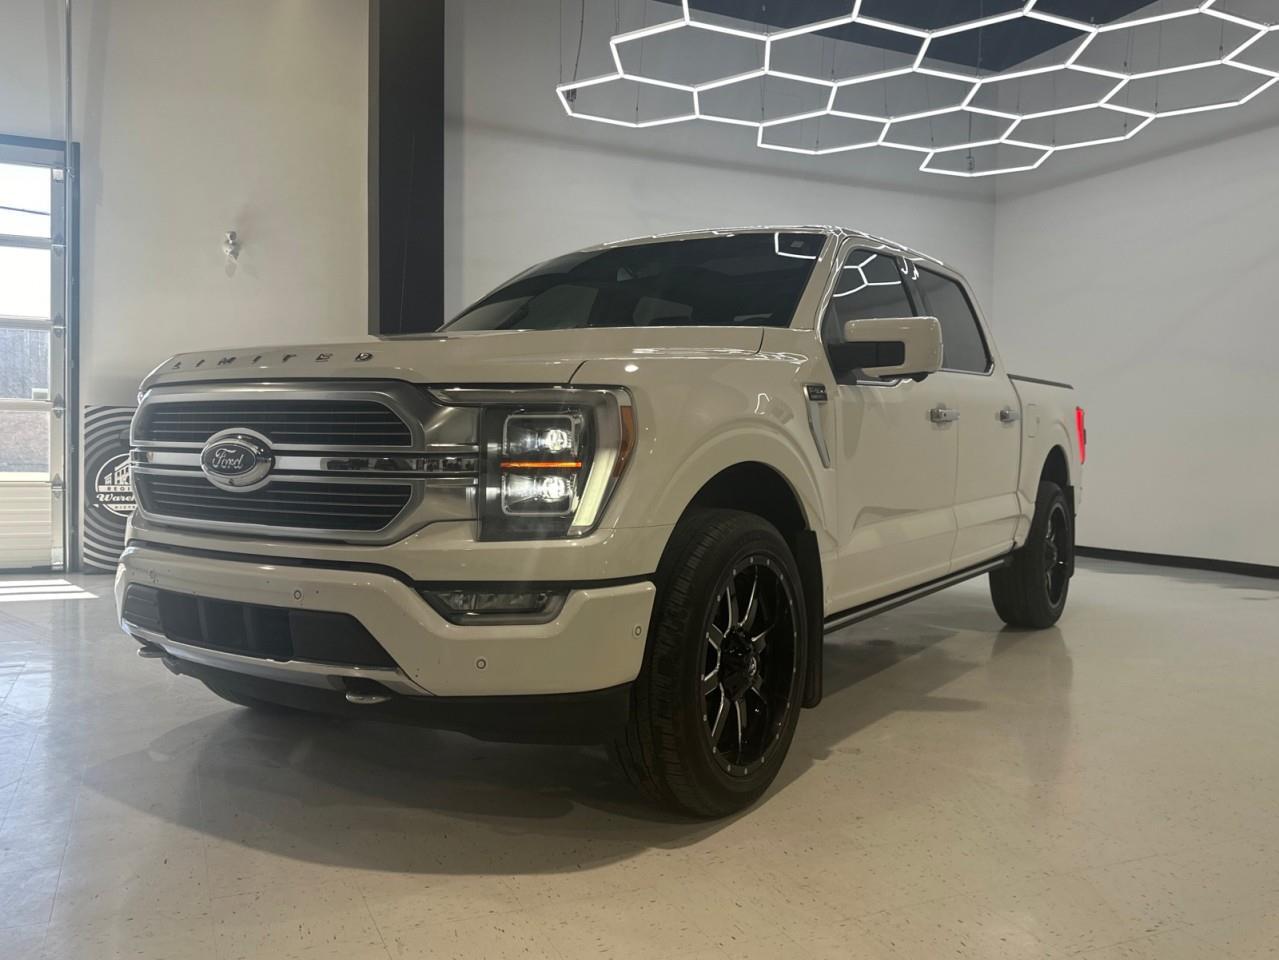 2021 Ford F-150 Comes with factory rims